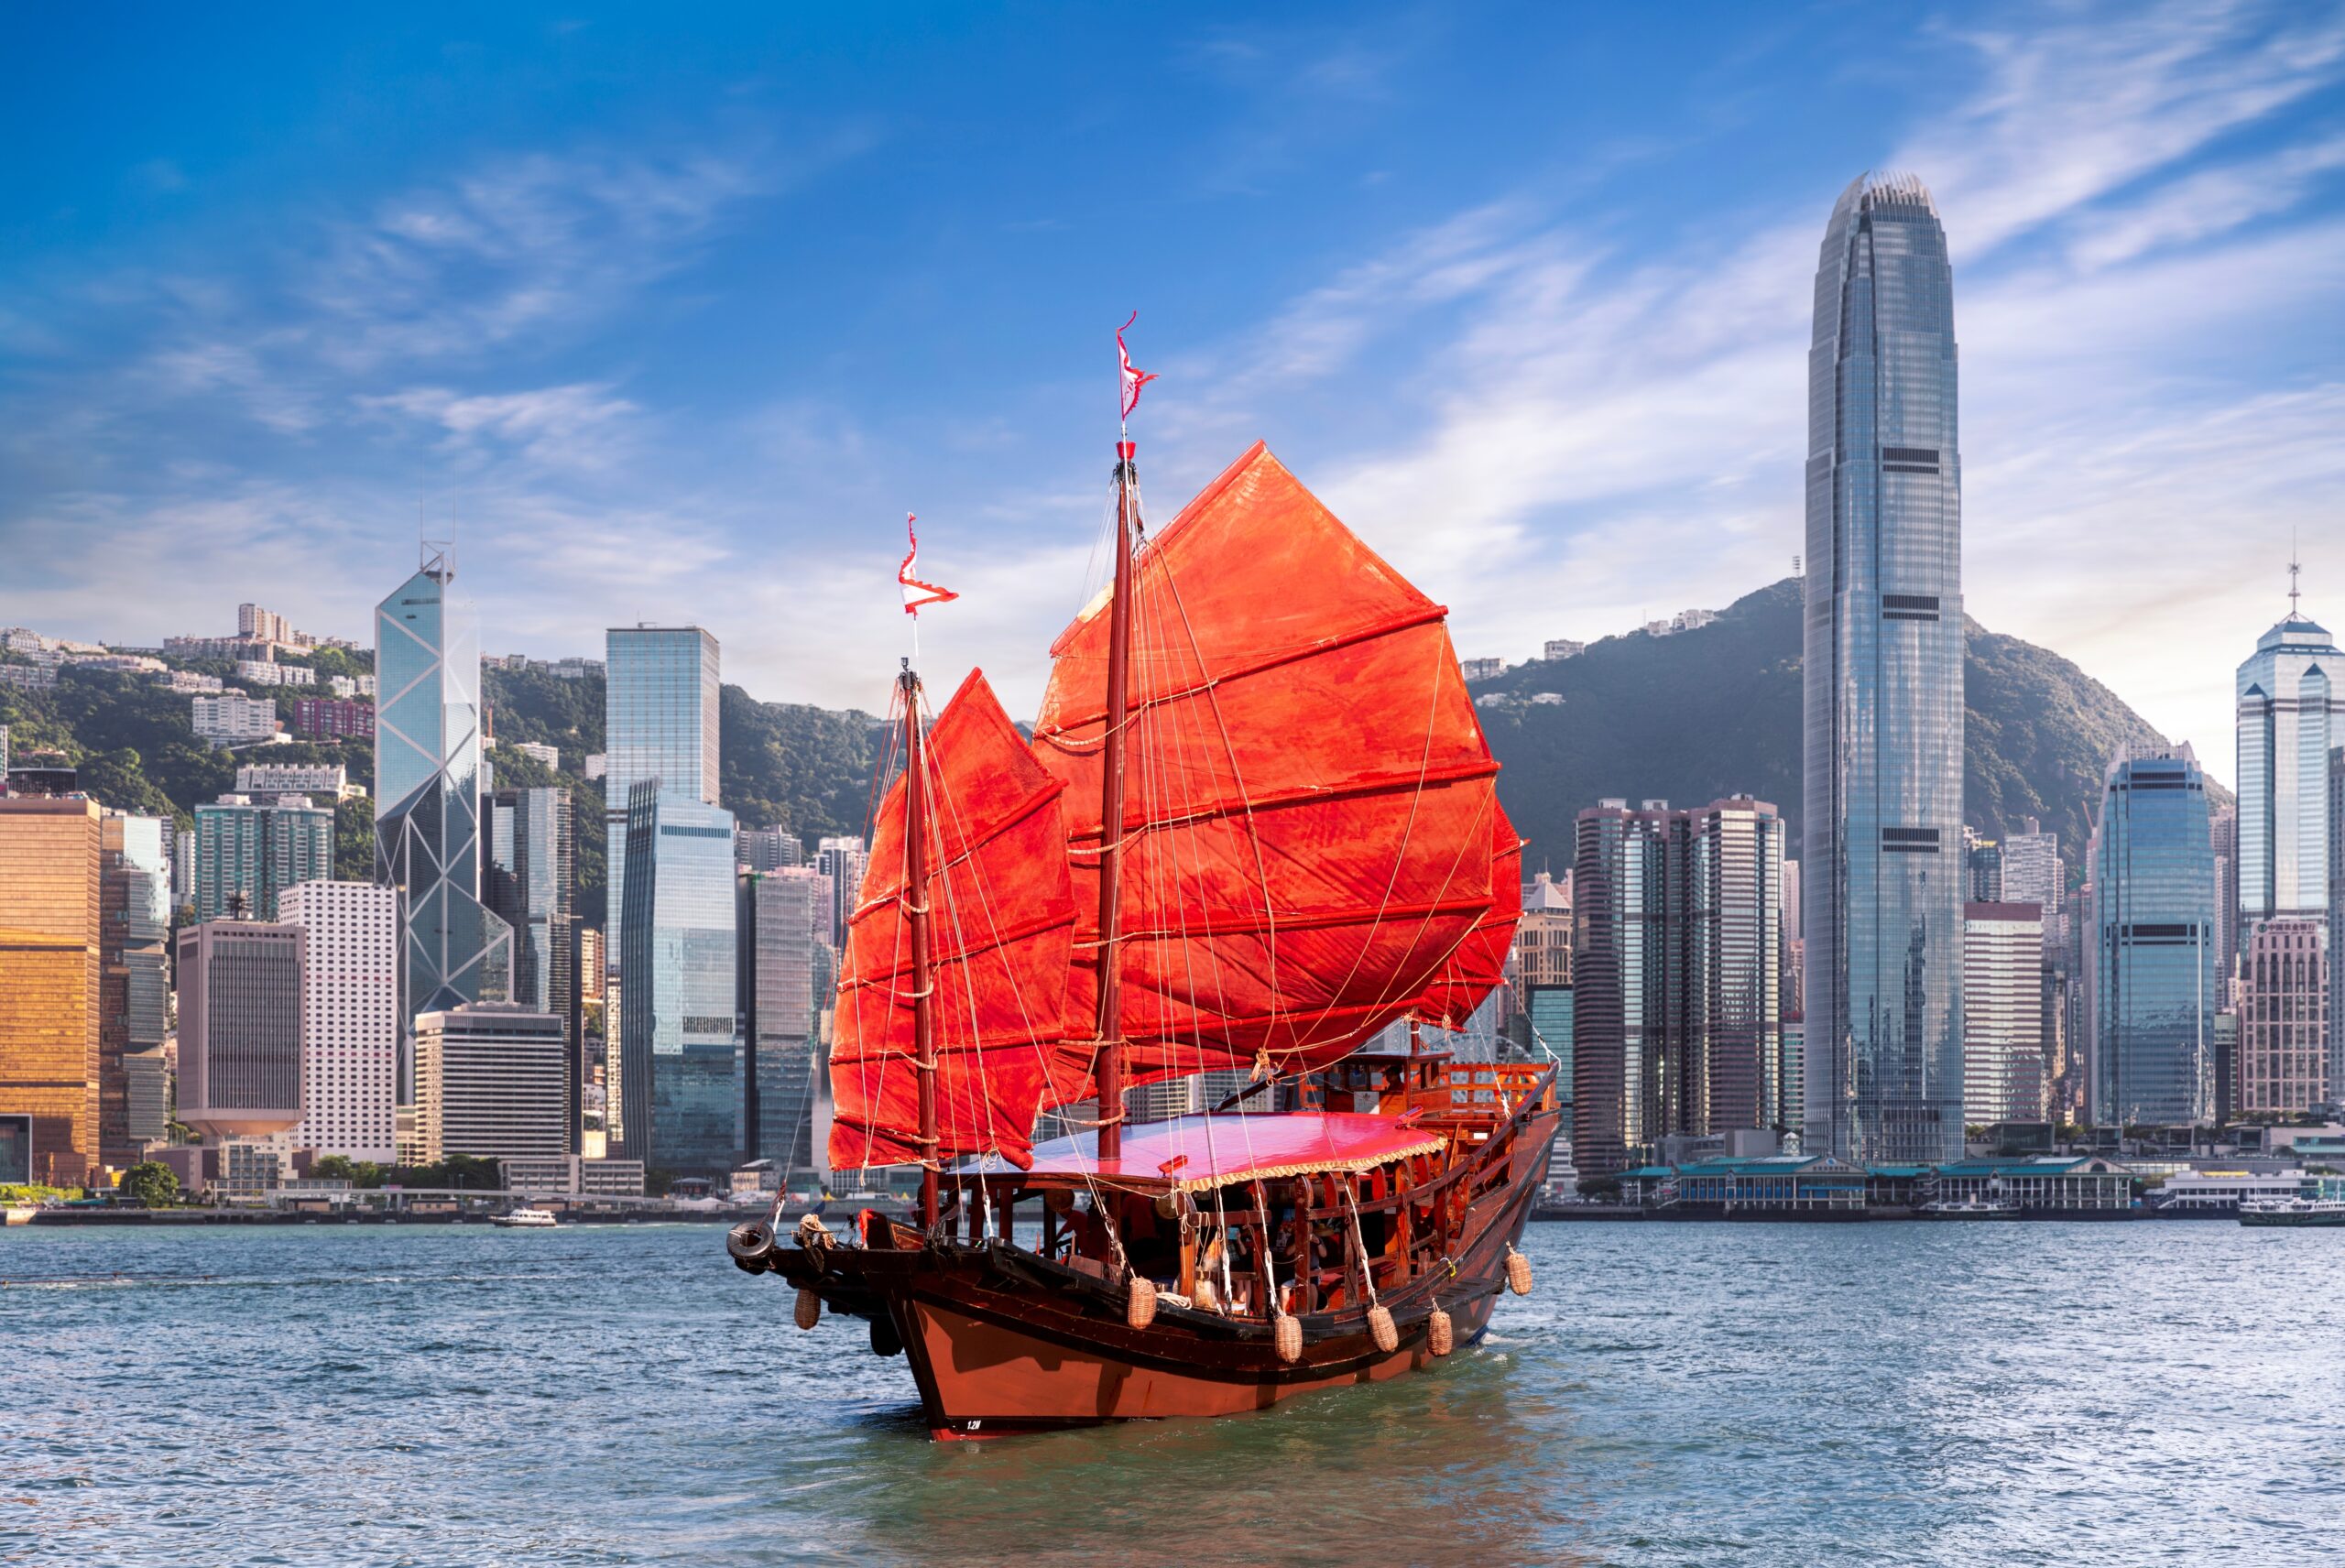 Property news roundup: Hong Kong relaxes property measures and other ...